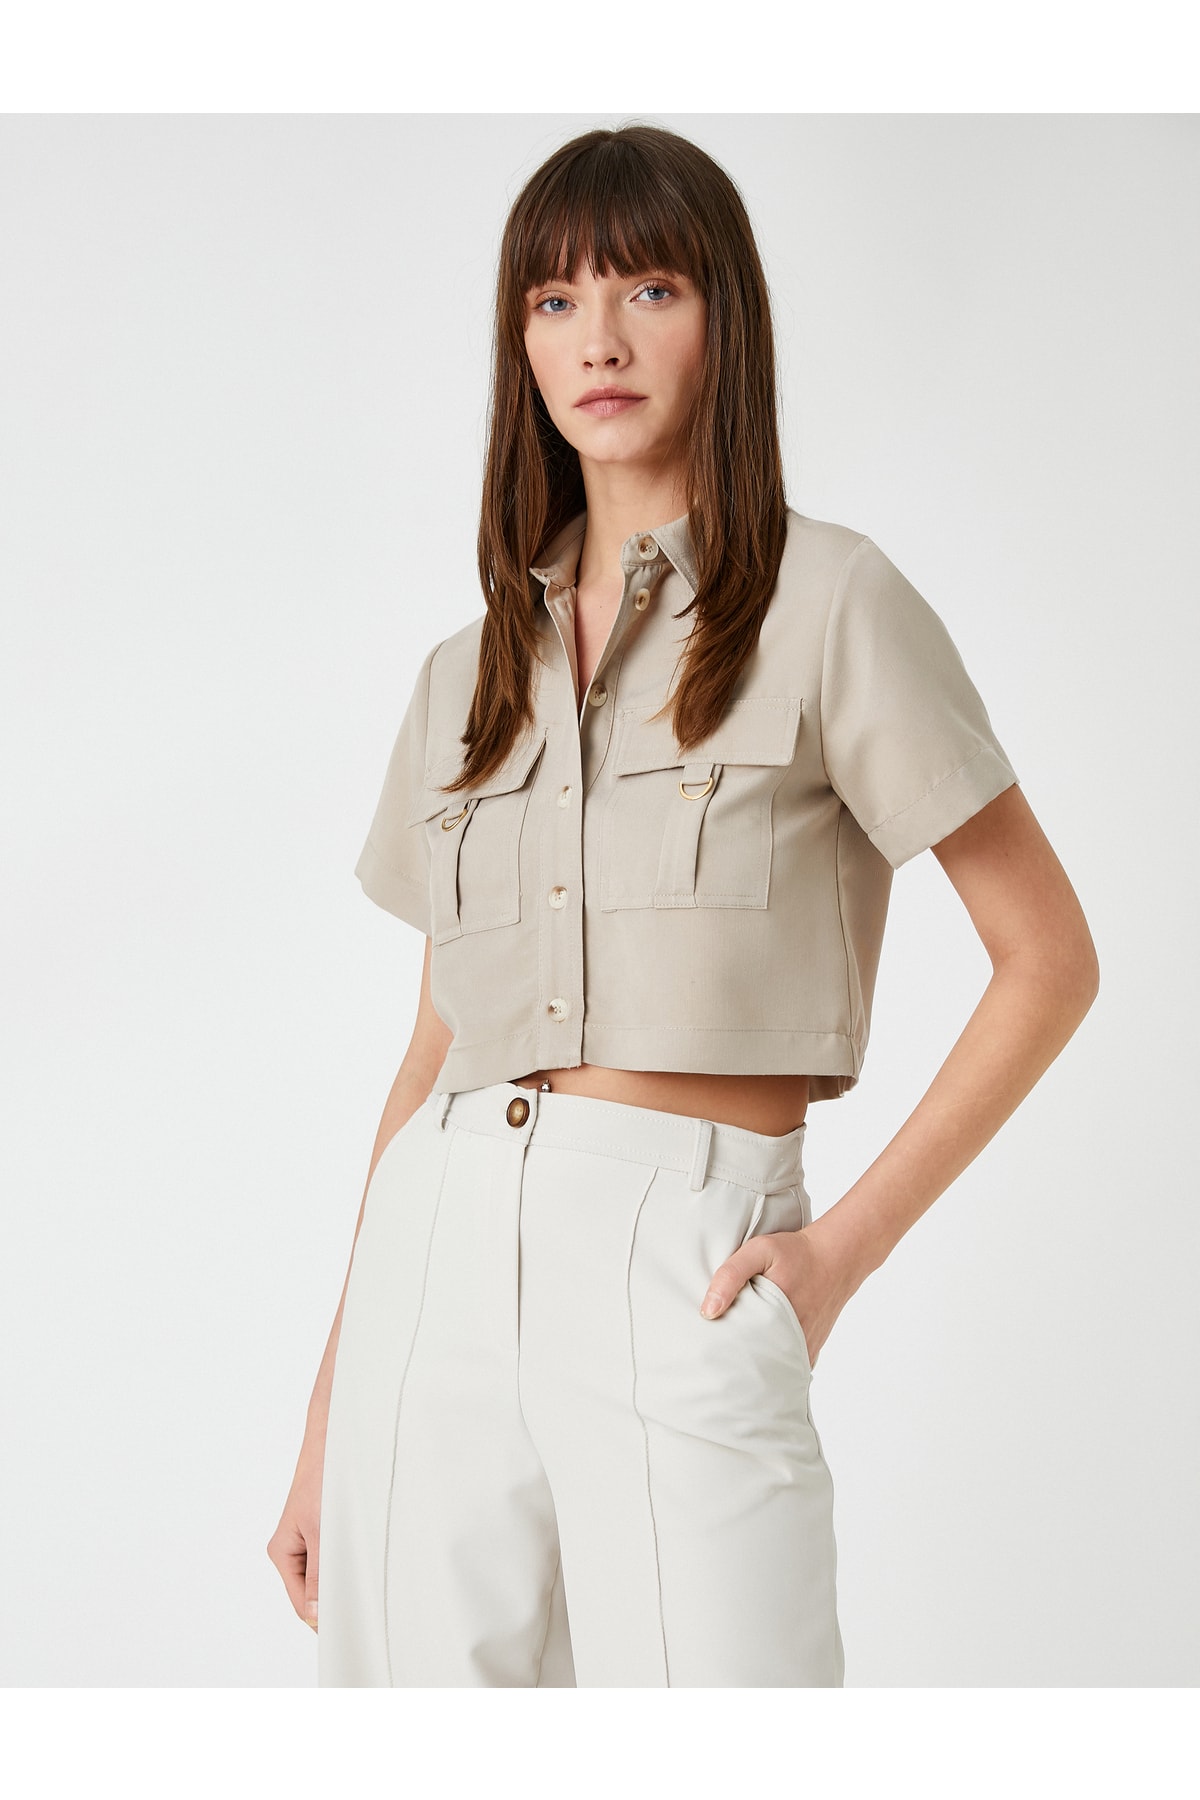 Koton Outdoor Look Crop Shirt Pocketed Buttoned Modal